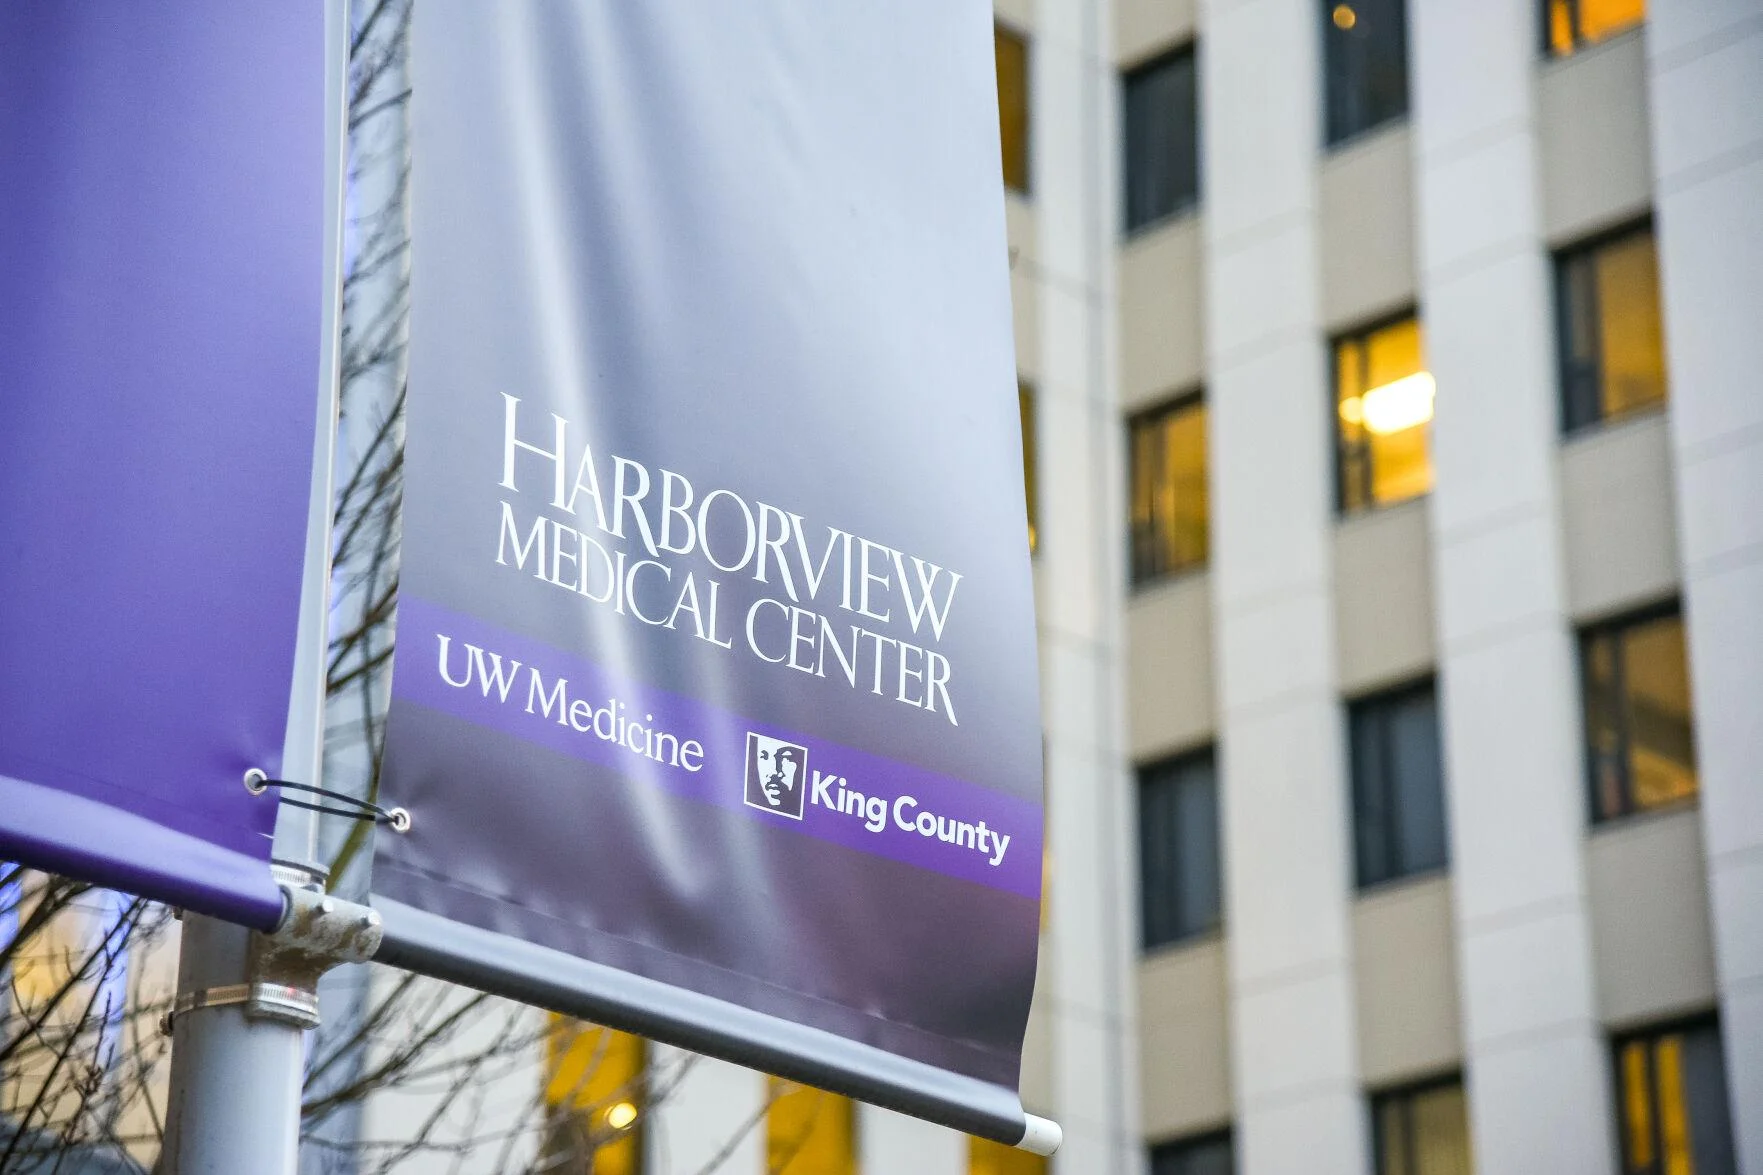 A photo of a purple vinyl banner that says "Harborview Medical Center UW Medicine - King County"